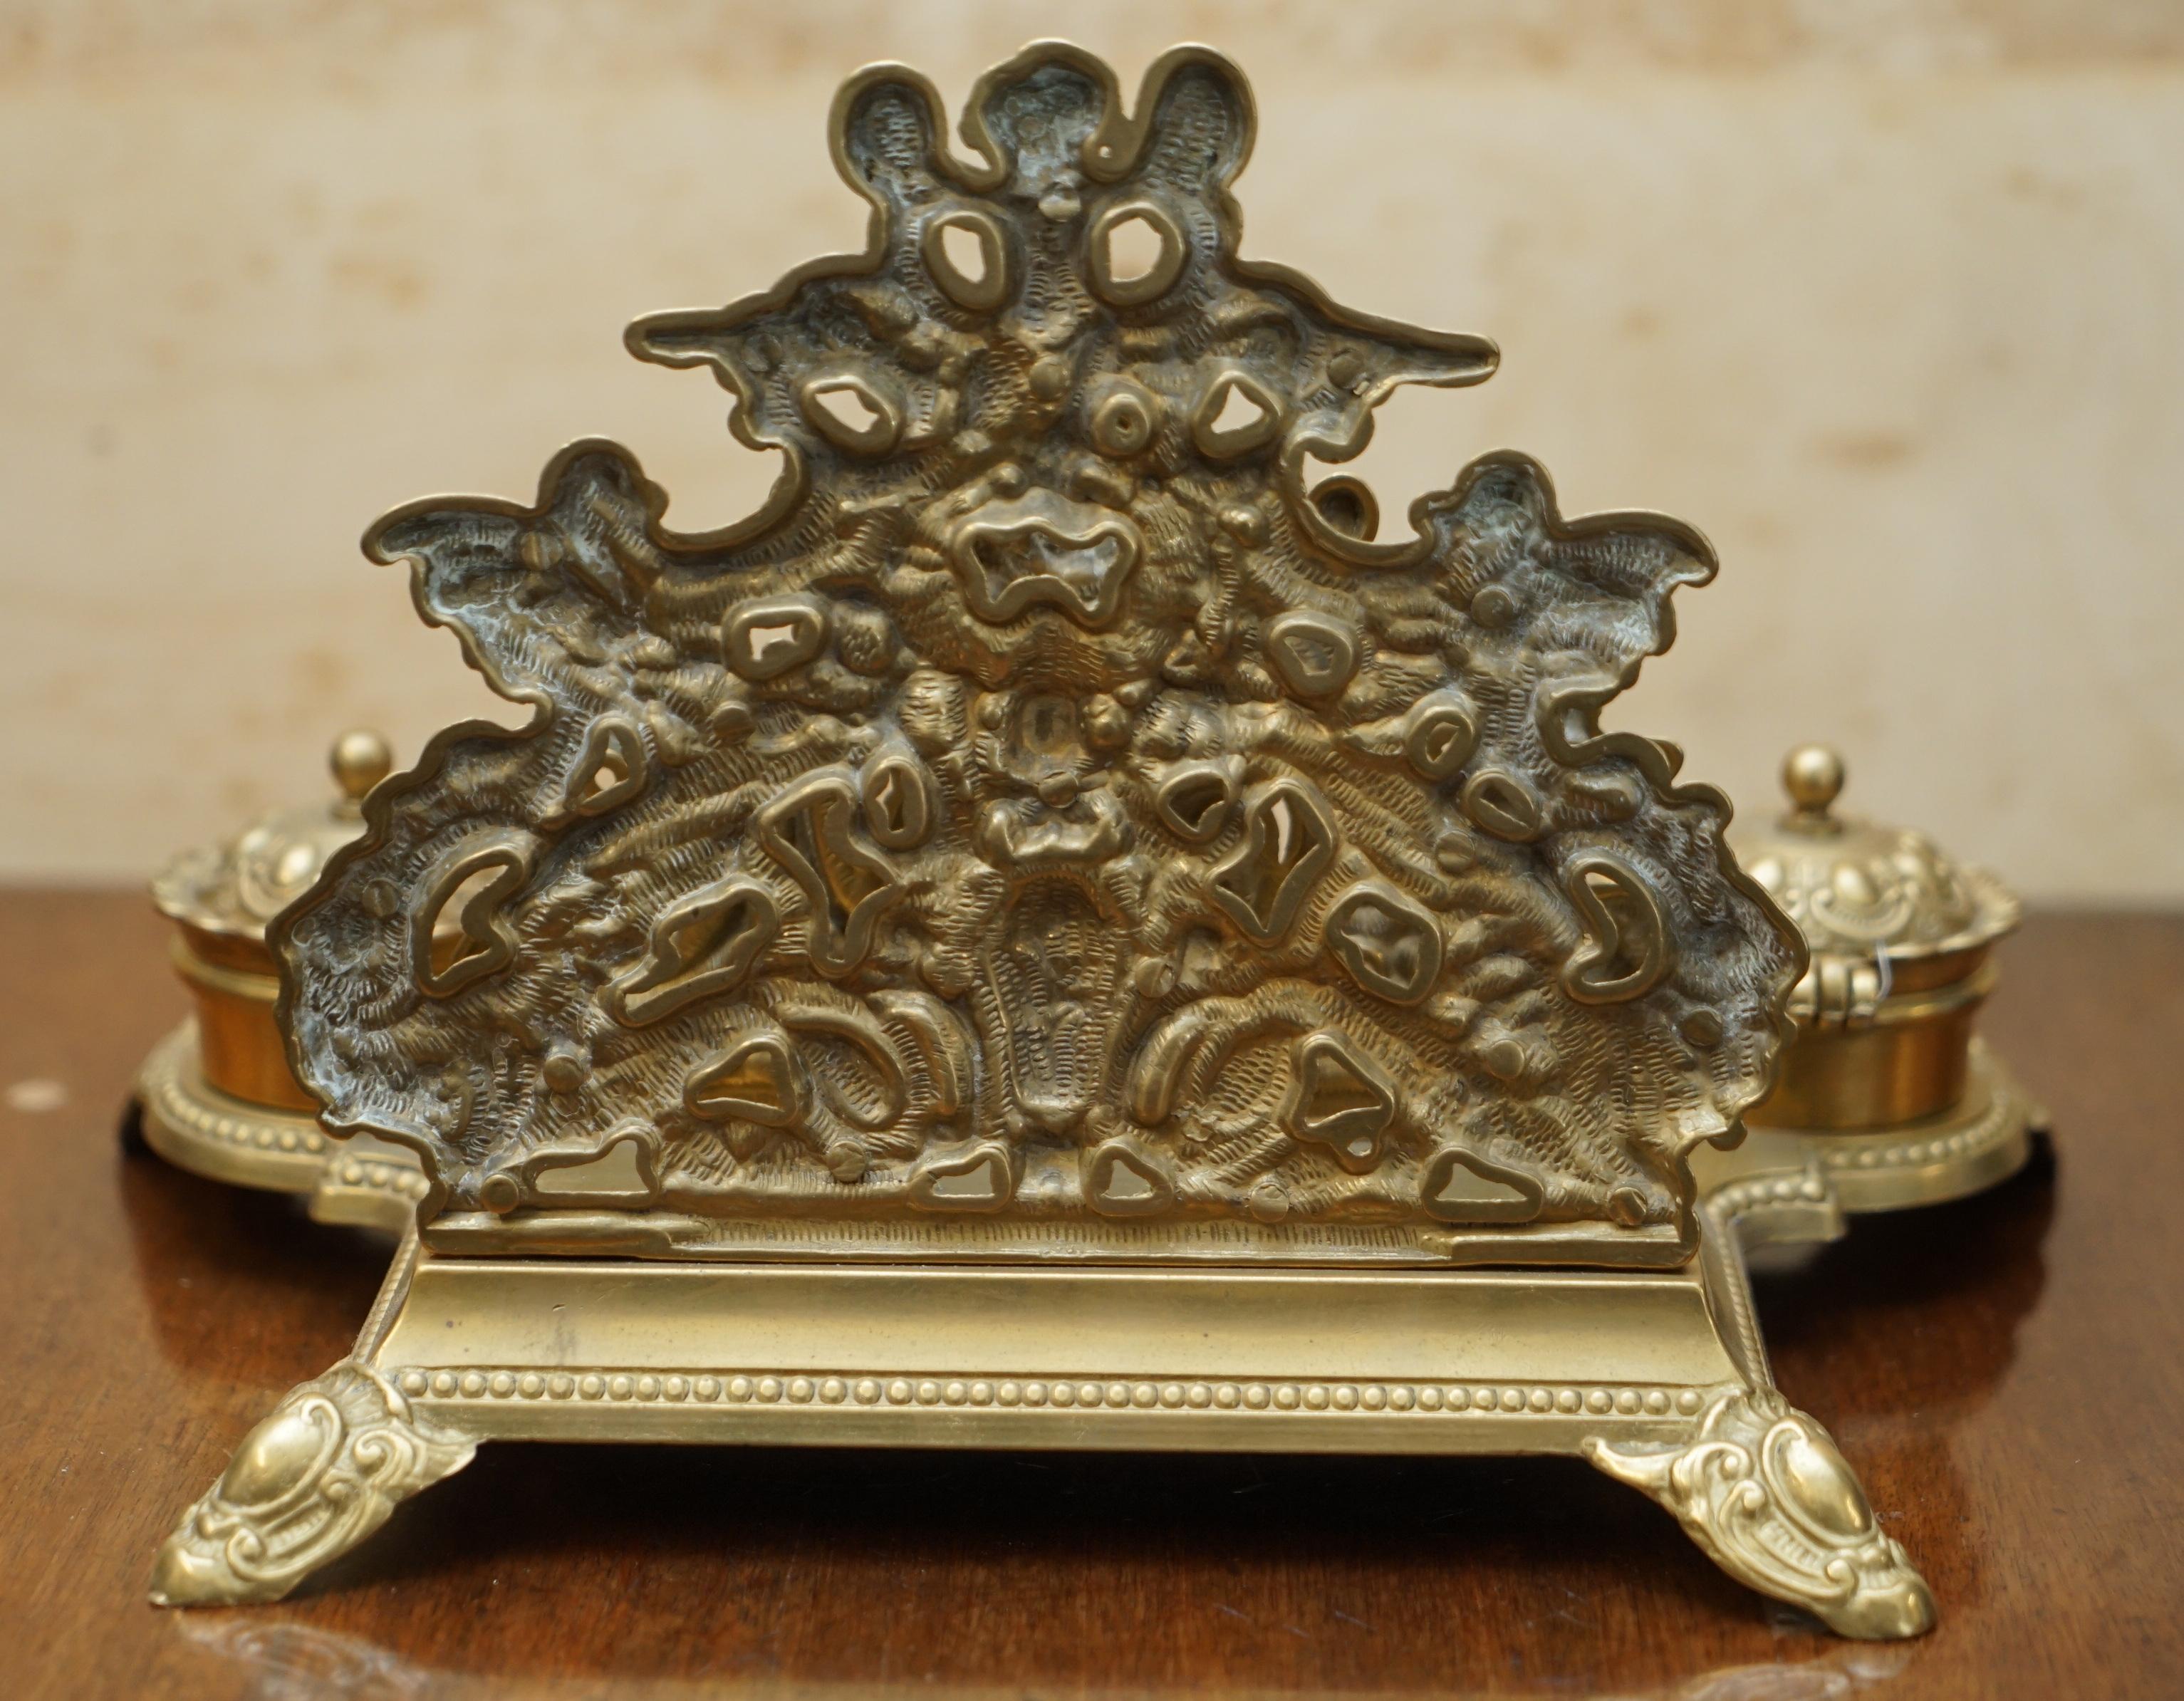 LOVELY ANTIQUE FRENCH BAROQUE REPOUSSE GiLT BRASS CHERUB INKWELL LETTER STAND For Sale 7